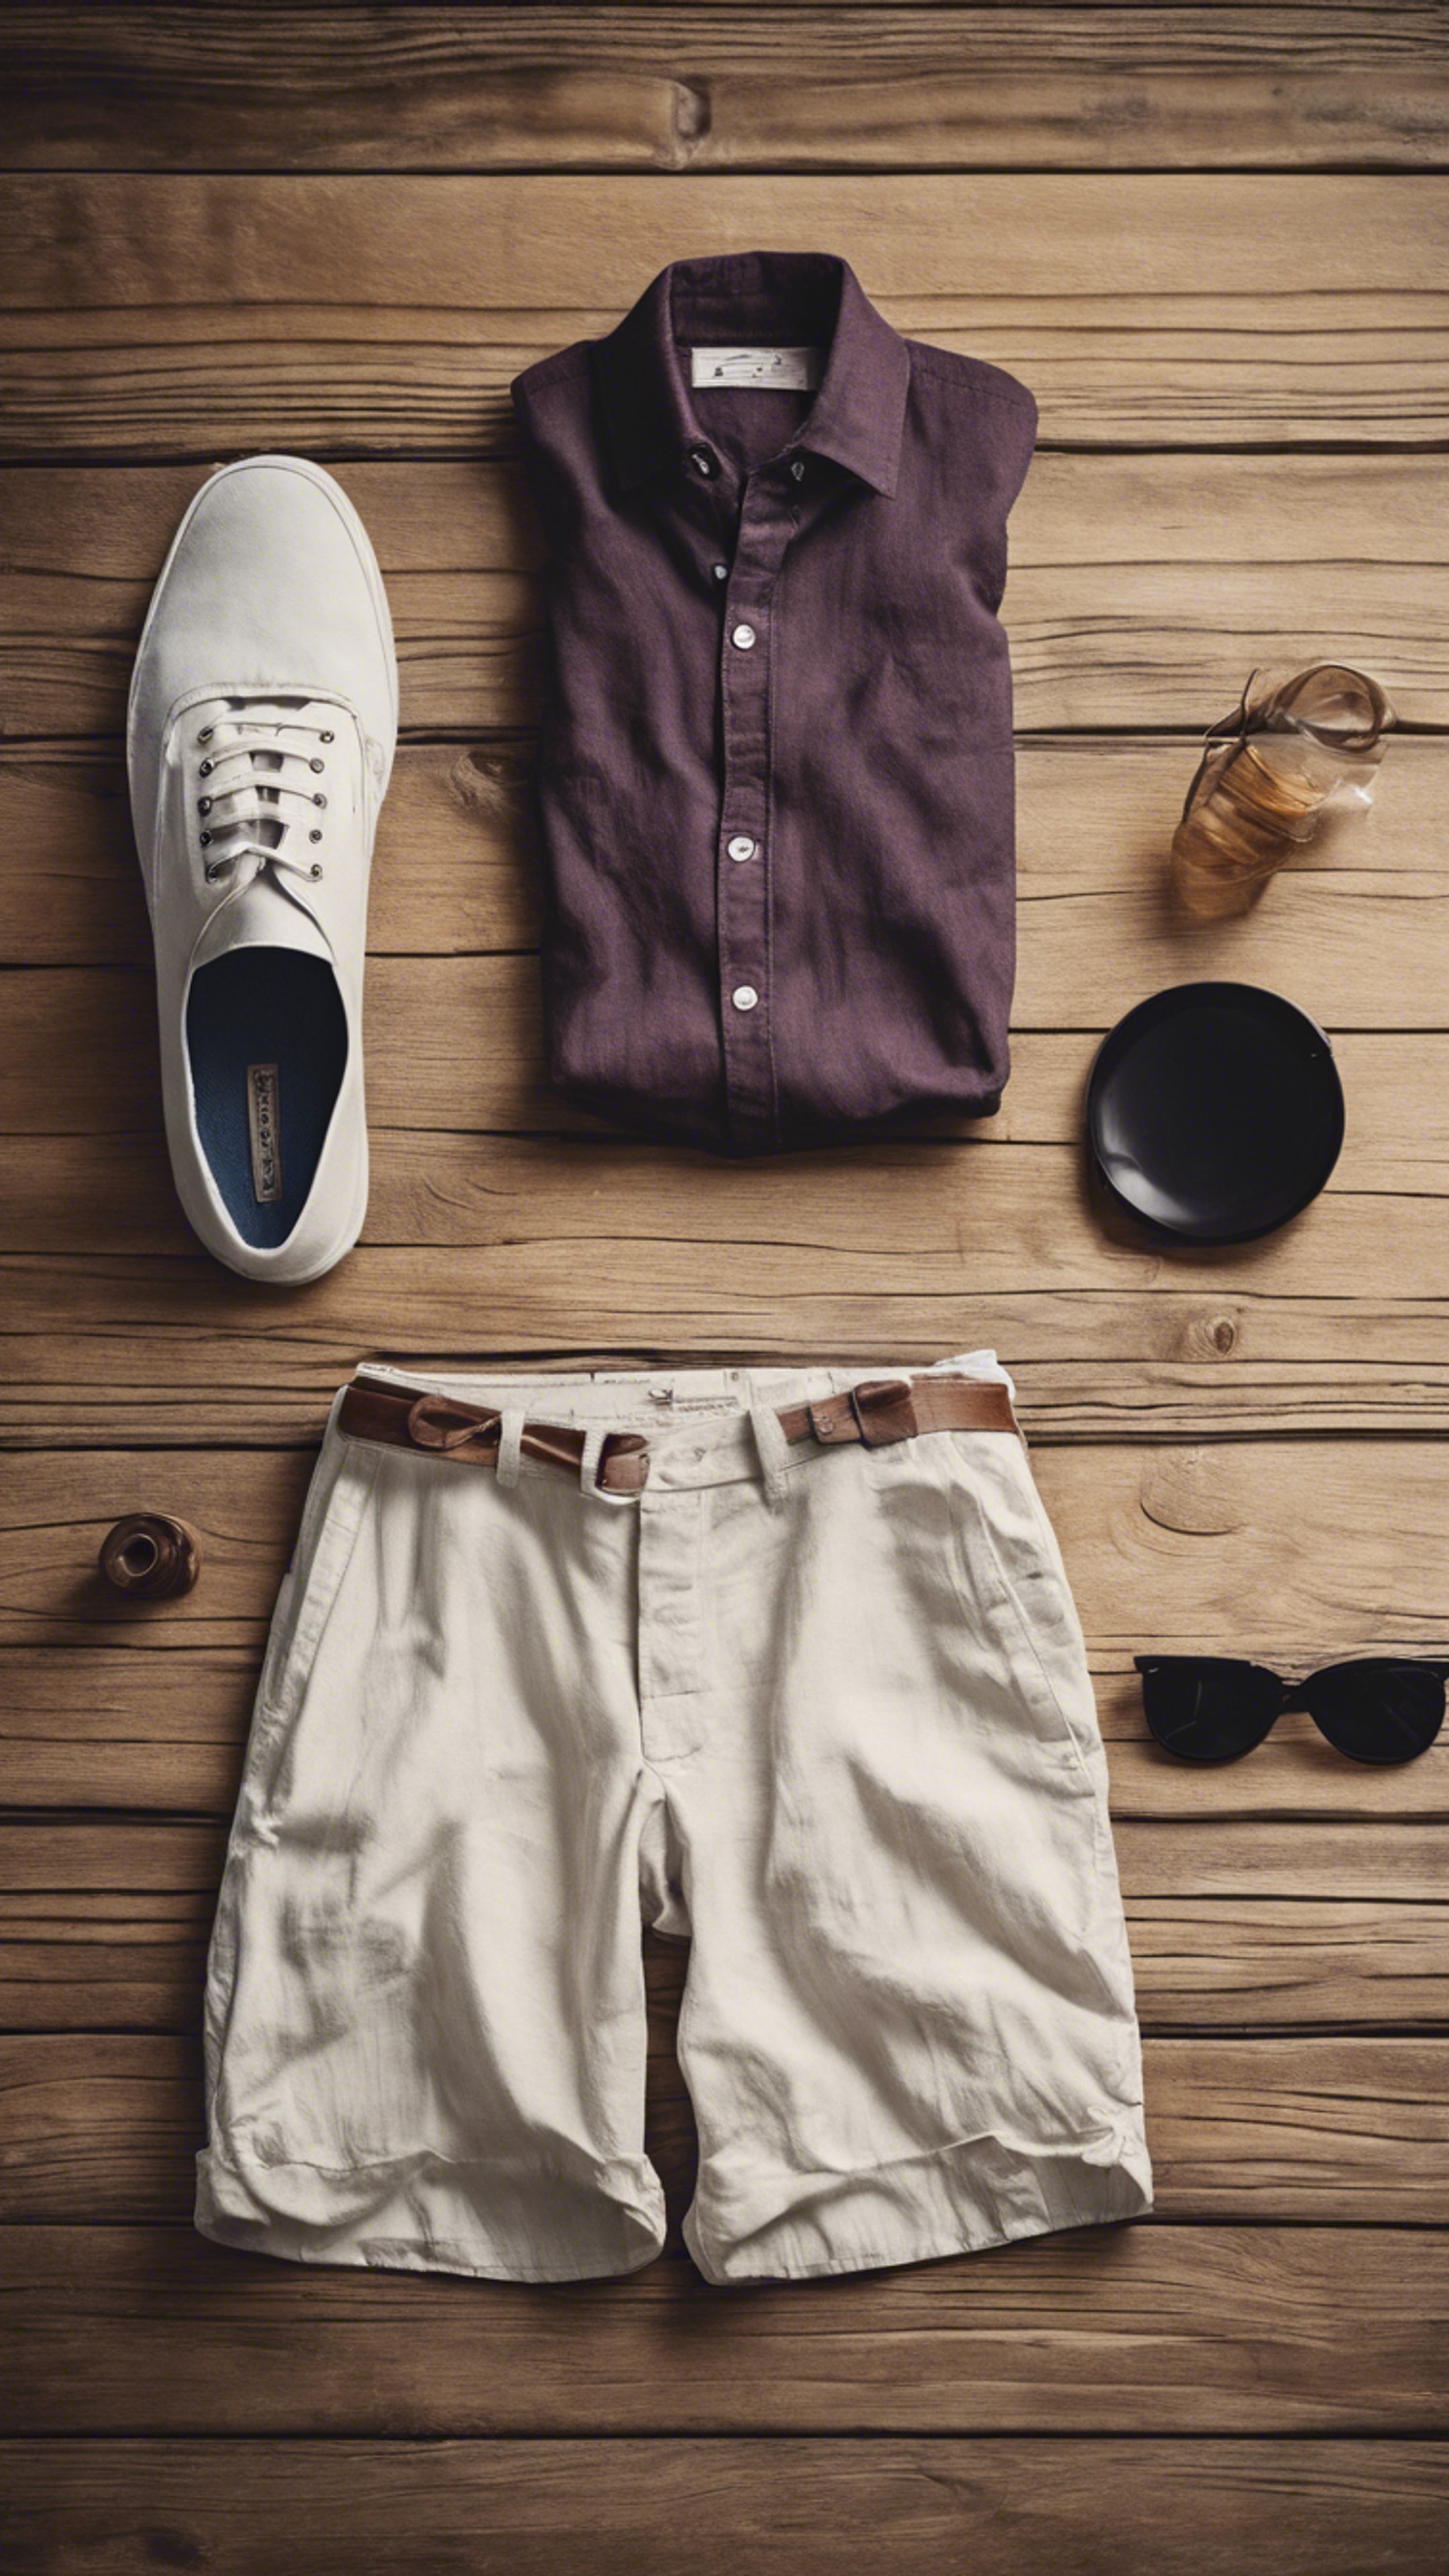 A casual preppy summer outfit, featuring a linen shirt, cotton shorts, and canvas slip-ons, laid out neatly on a rustic wooden table. Wallpaper[935d28da785e4fc8a098]